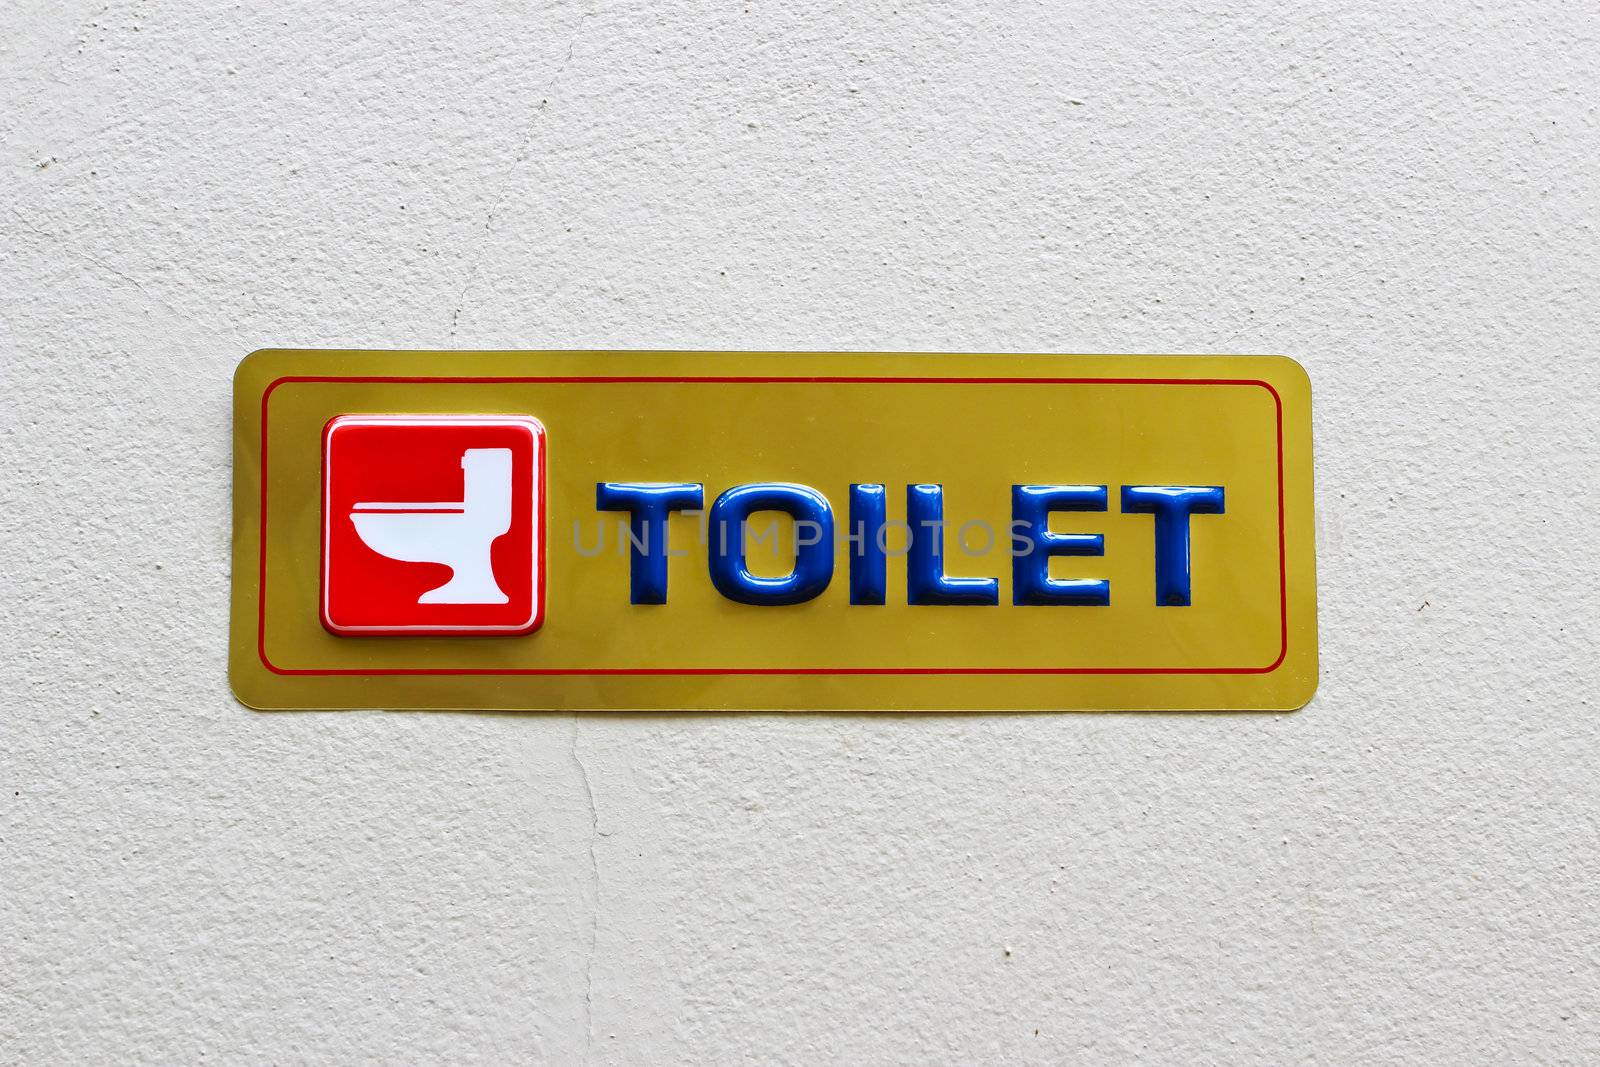 Sign of public toilets WC